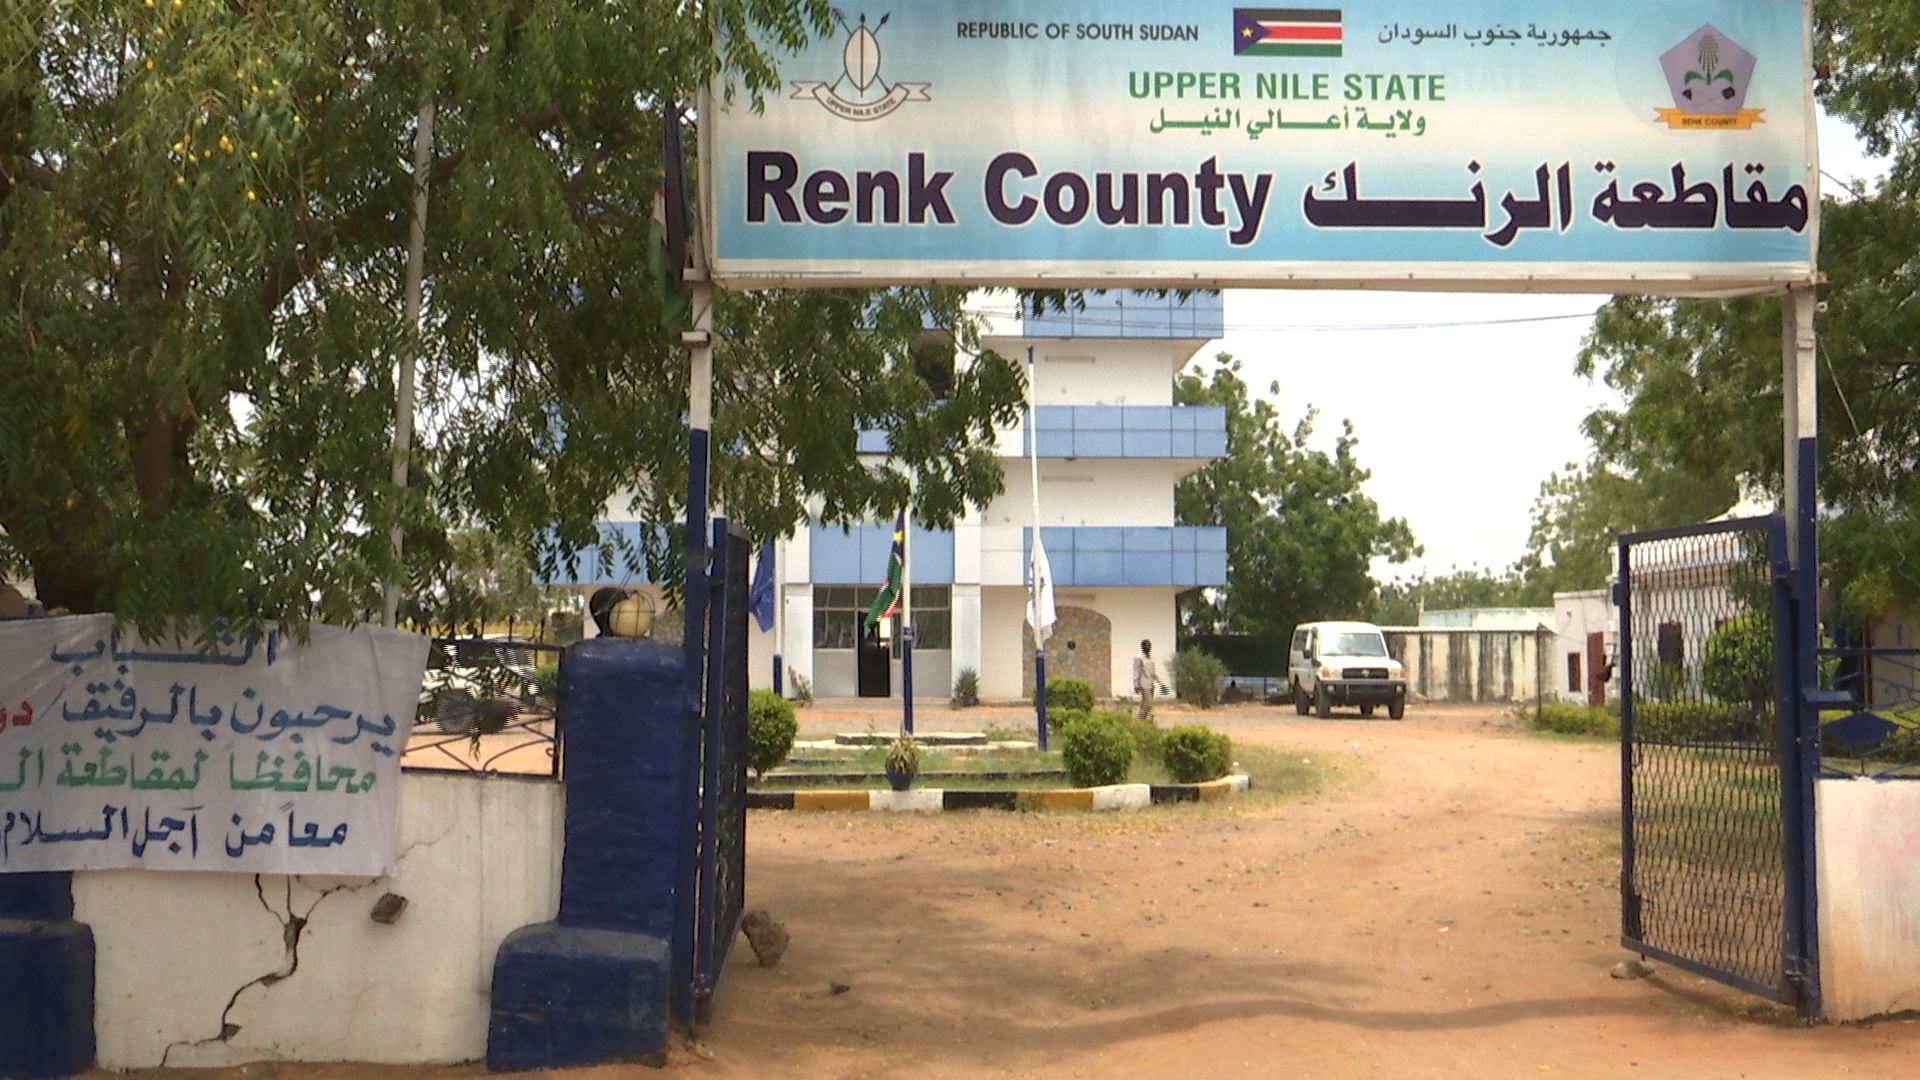 Renk hires medical specialists using oil shares to boost health services